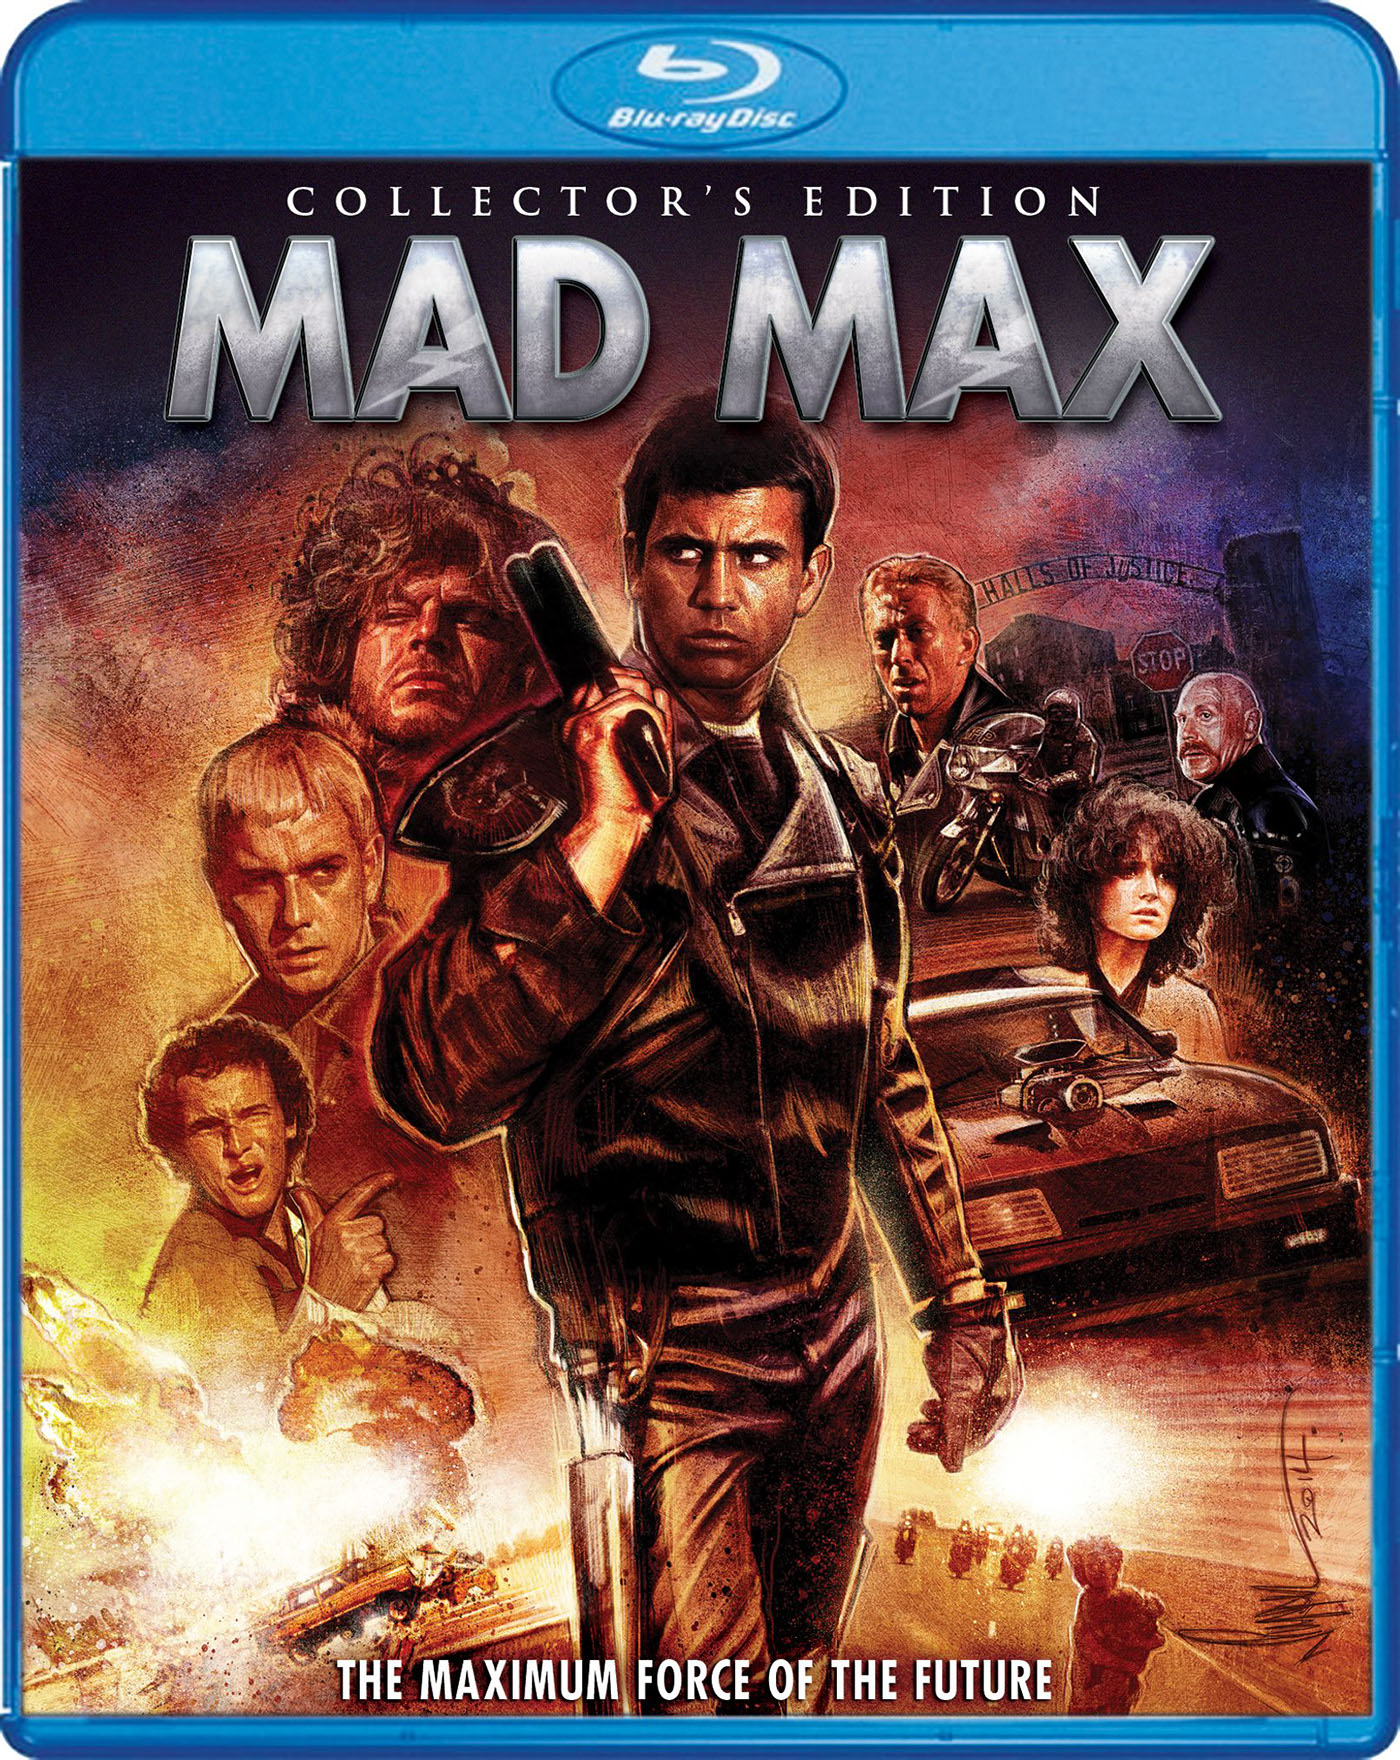 Mad Max bluray Collectors Edition film poster print cover Gibson George Miller